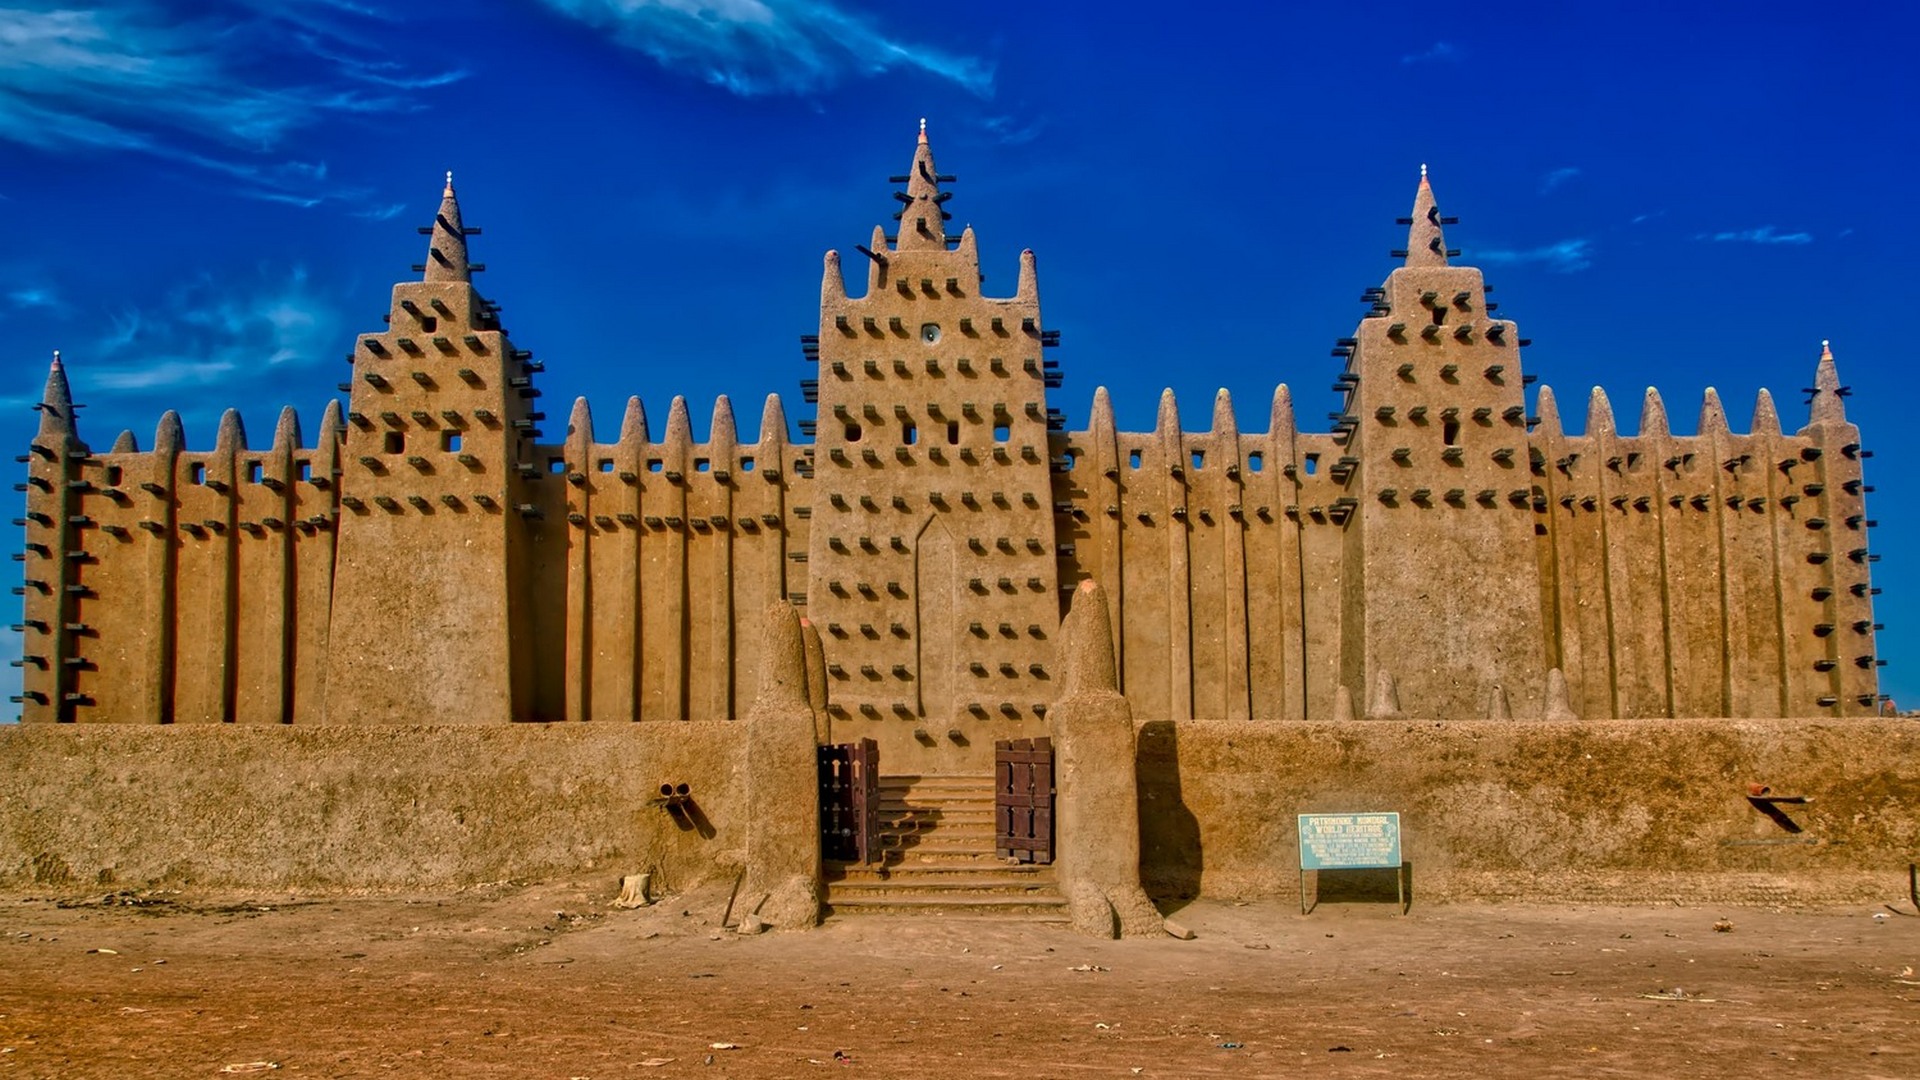 World Architecture Day: Africa's Innovative Architectural Marvels | Great Mosque of Djenne, Mali